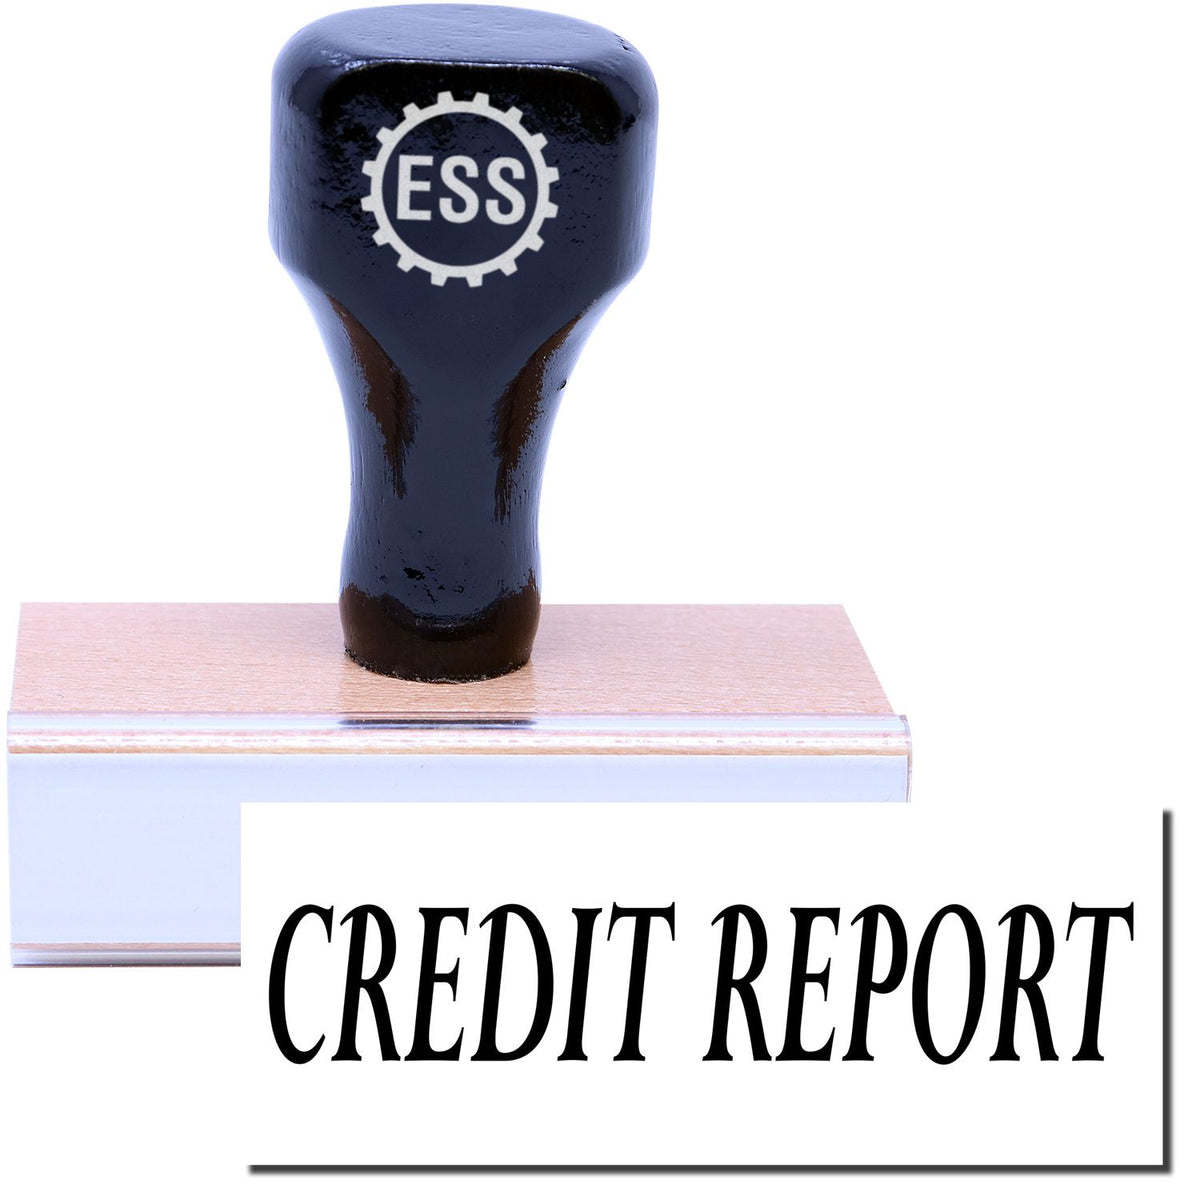 A stock office rubber stamp with a stamped image showing how the text &quot;CREDIT REPORT&quot; is displayed after stamping.